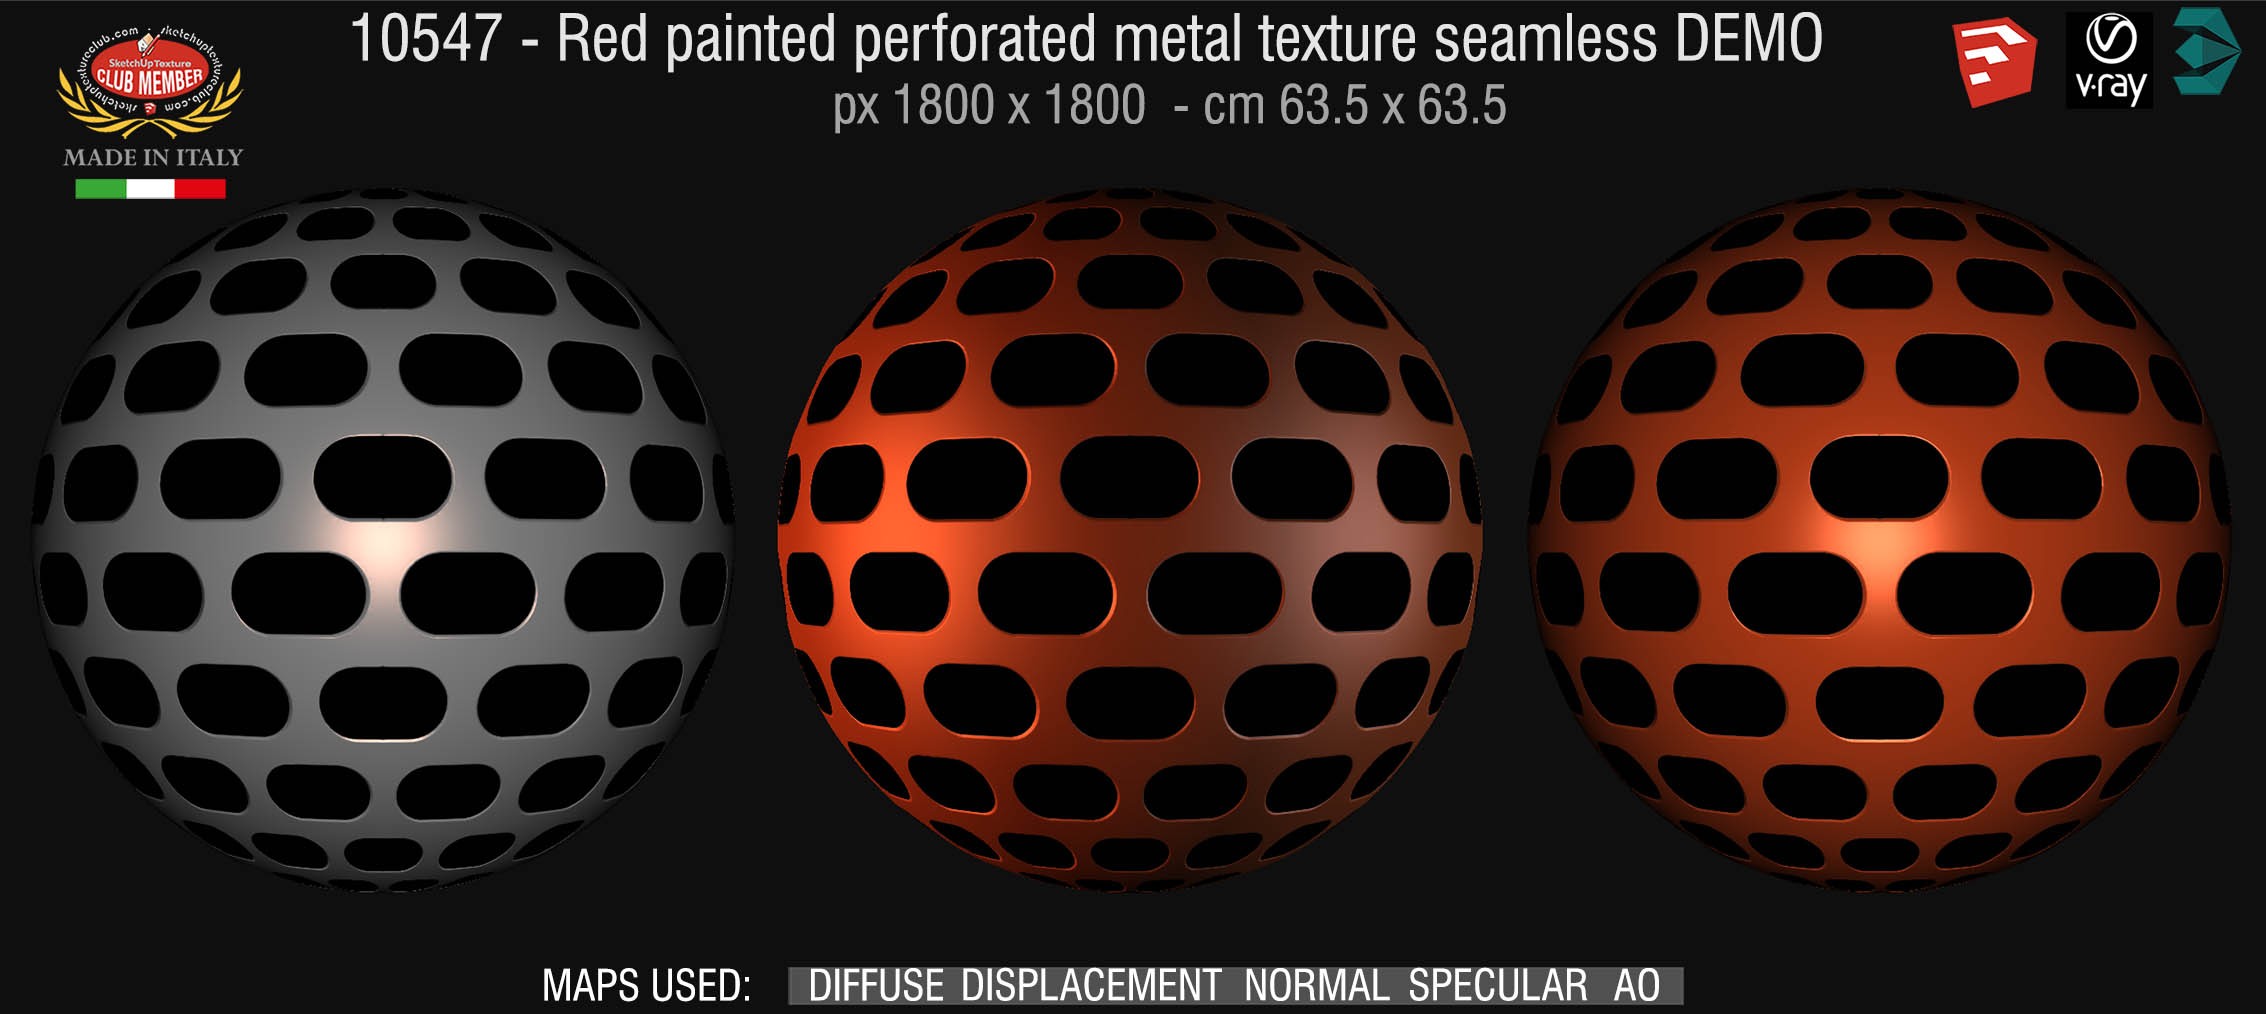 10547 HR Red painted perforate metal texture seamless  + maps DEMO